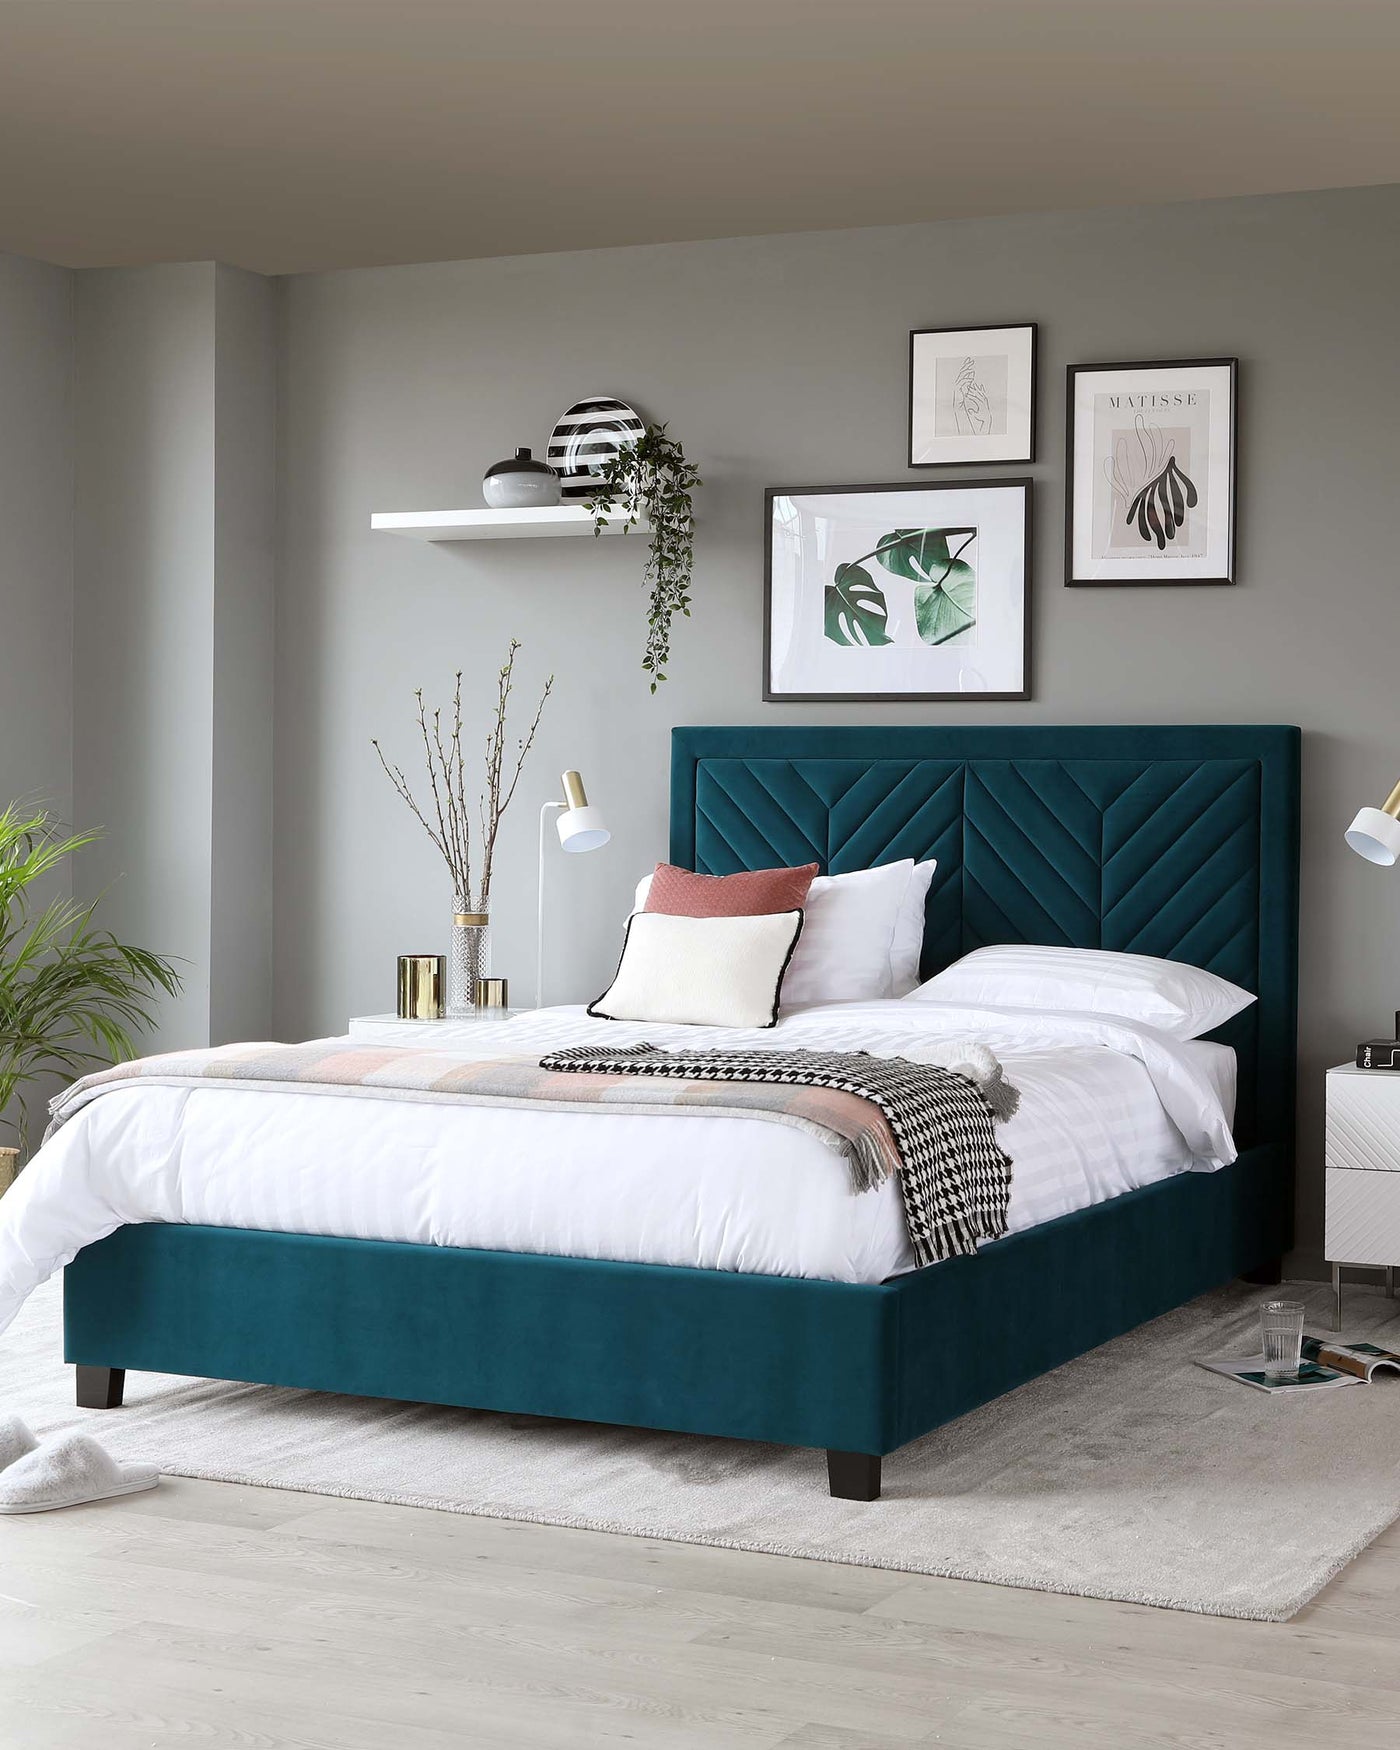 Elegant teal upholstered bed frame with a high tufted headboard, complemented by dark wooden legs, set on a soft grey area rug.